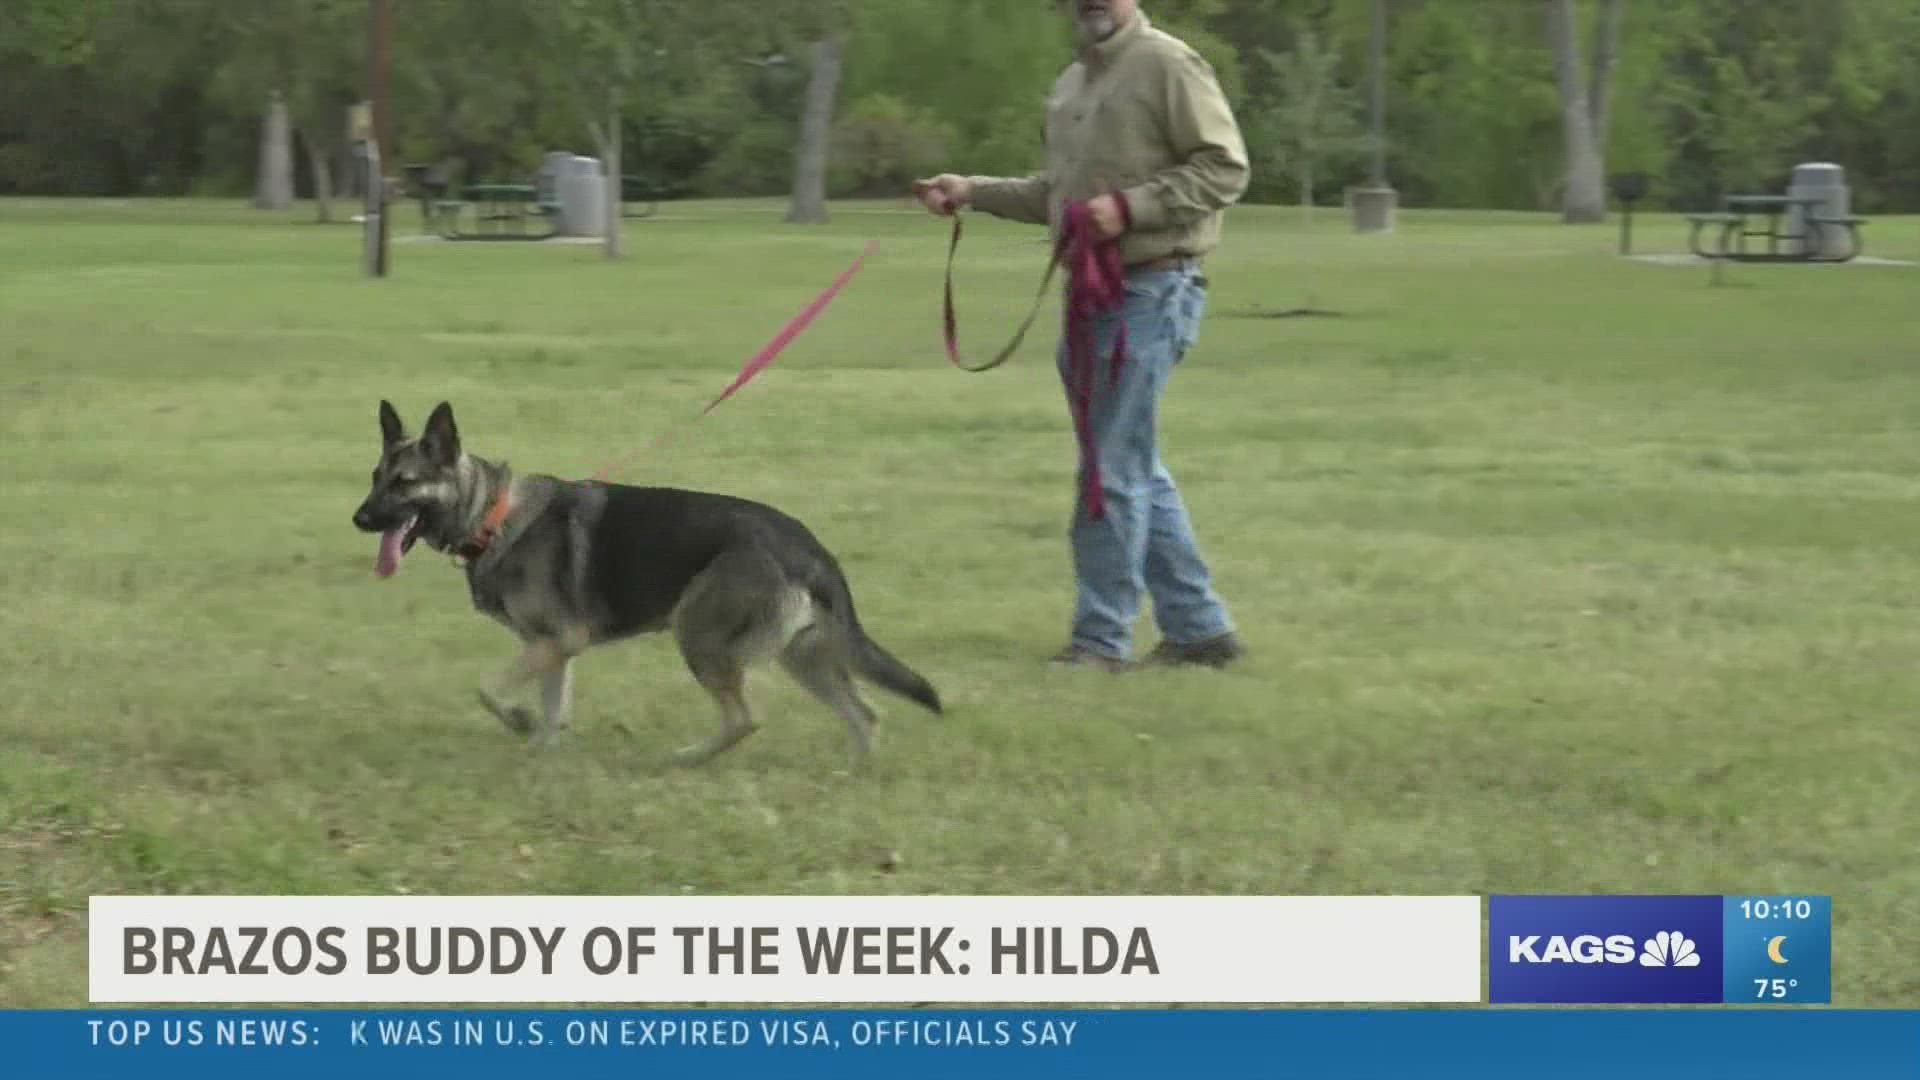 This week's featured Brazos Buddy is Hilda, a three-year-old German Shepherd mix that's looking for her forever home.